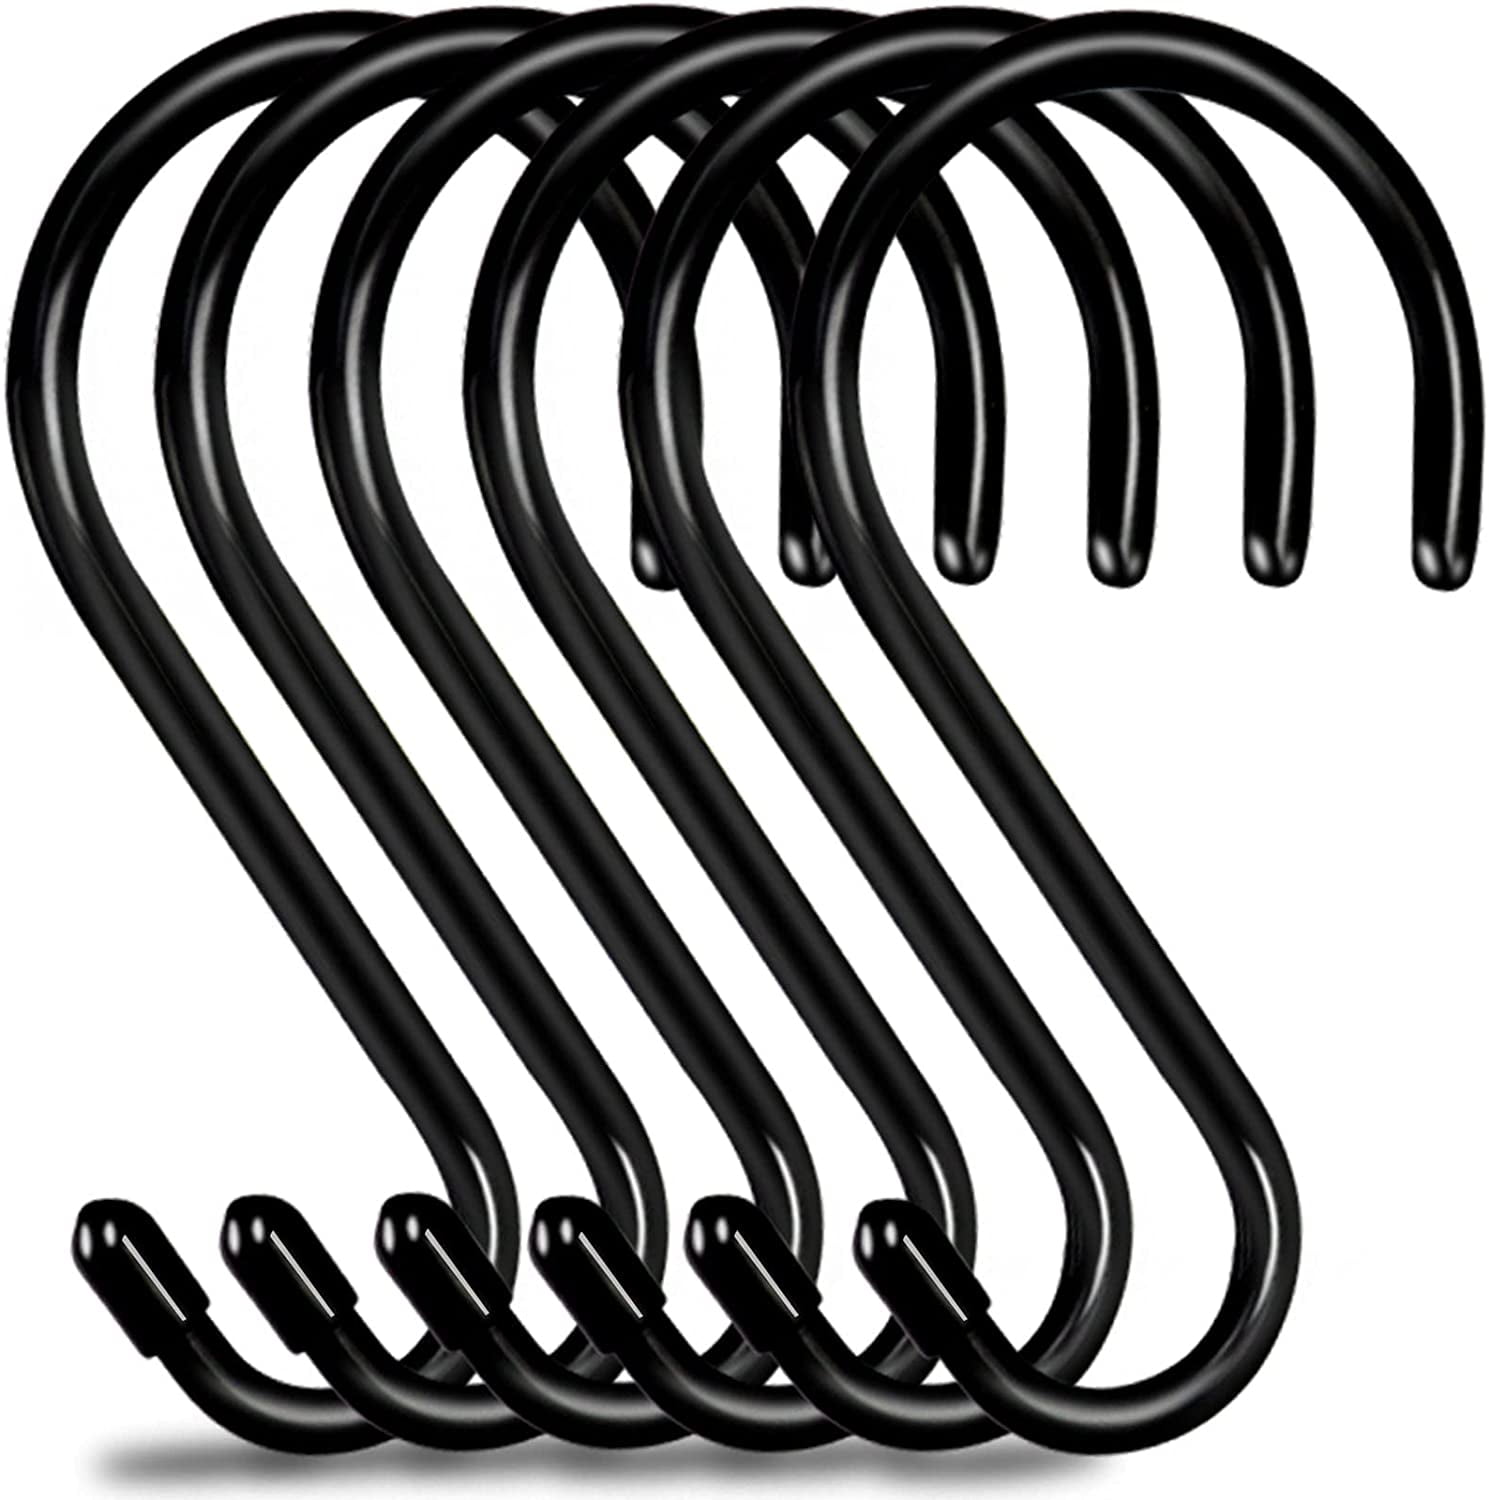 Closet Hooks No Scrach 16 Pack Heavy Duty Metal Rustproof Sturdy Versatile Hooks for Hanging Jeans Pots Pans Kitchen Utensils from Wire Shelving or Pot Rack LQJ PRO S Hooks Size Medium and Large 